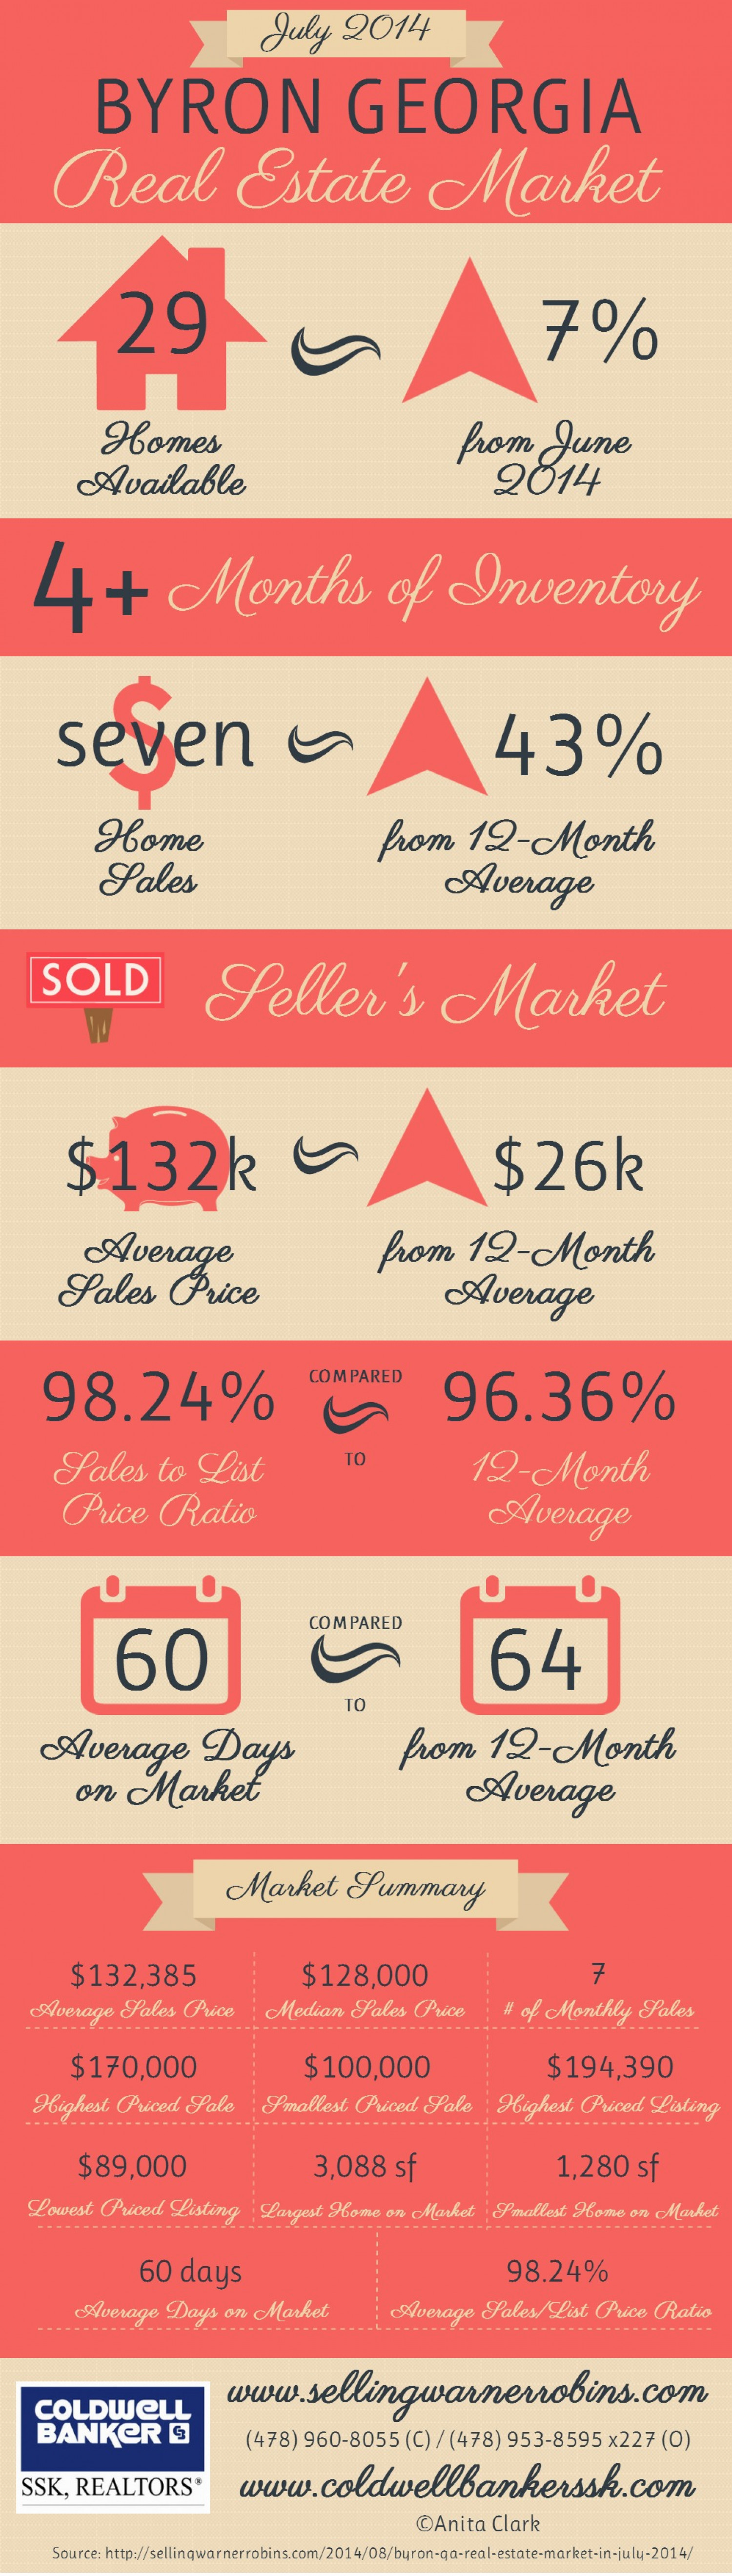 Byron GA Real Estate Market in July 2014 Infographic